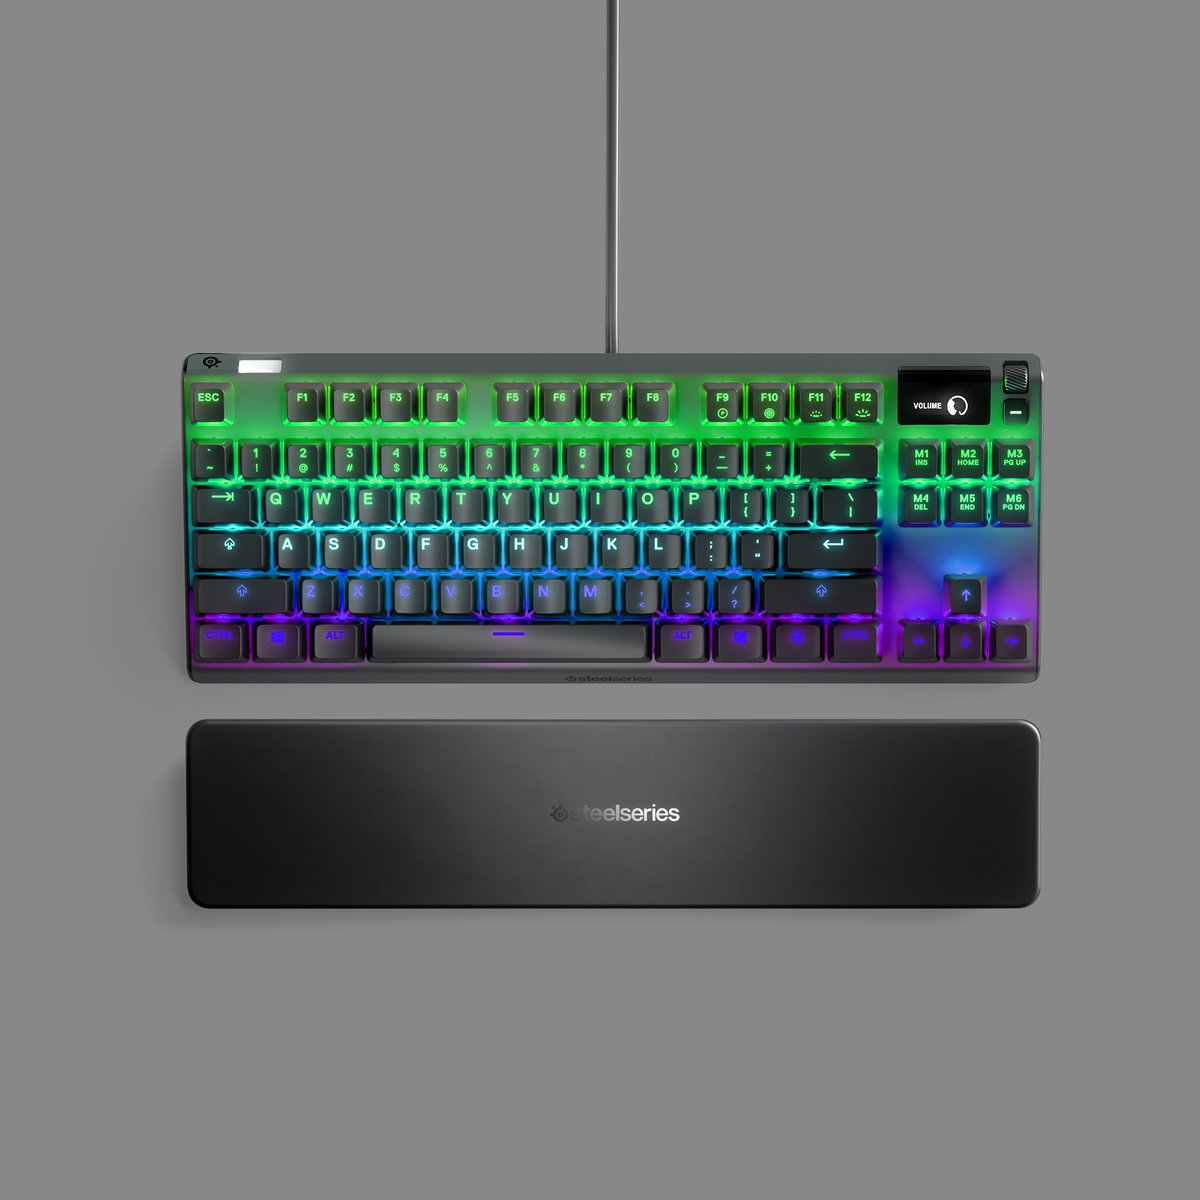 Steelseries This Could Be On Your Desk Right Now But You Re Too Busy Paying Food Delivery Services 30 To Bring You A 12 Meal Apex Pro Tkl T Co 7hry6s7zw3 T Co Fyffbt1o0k